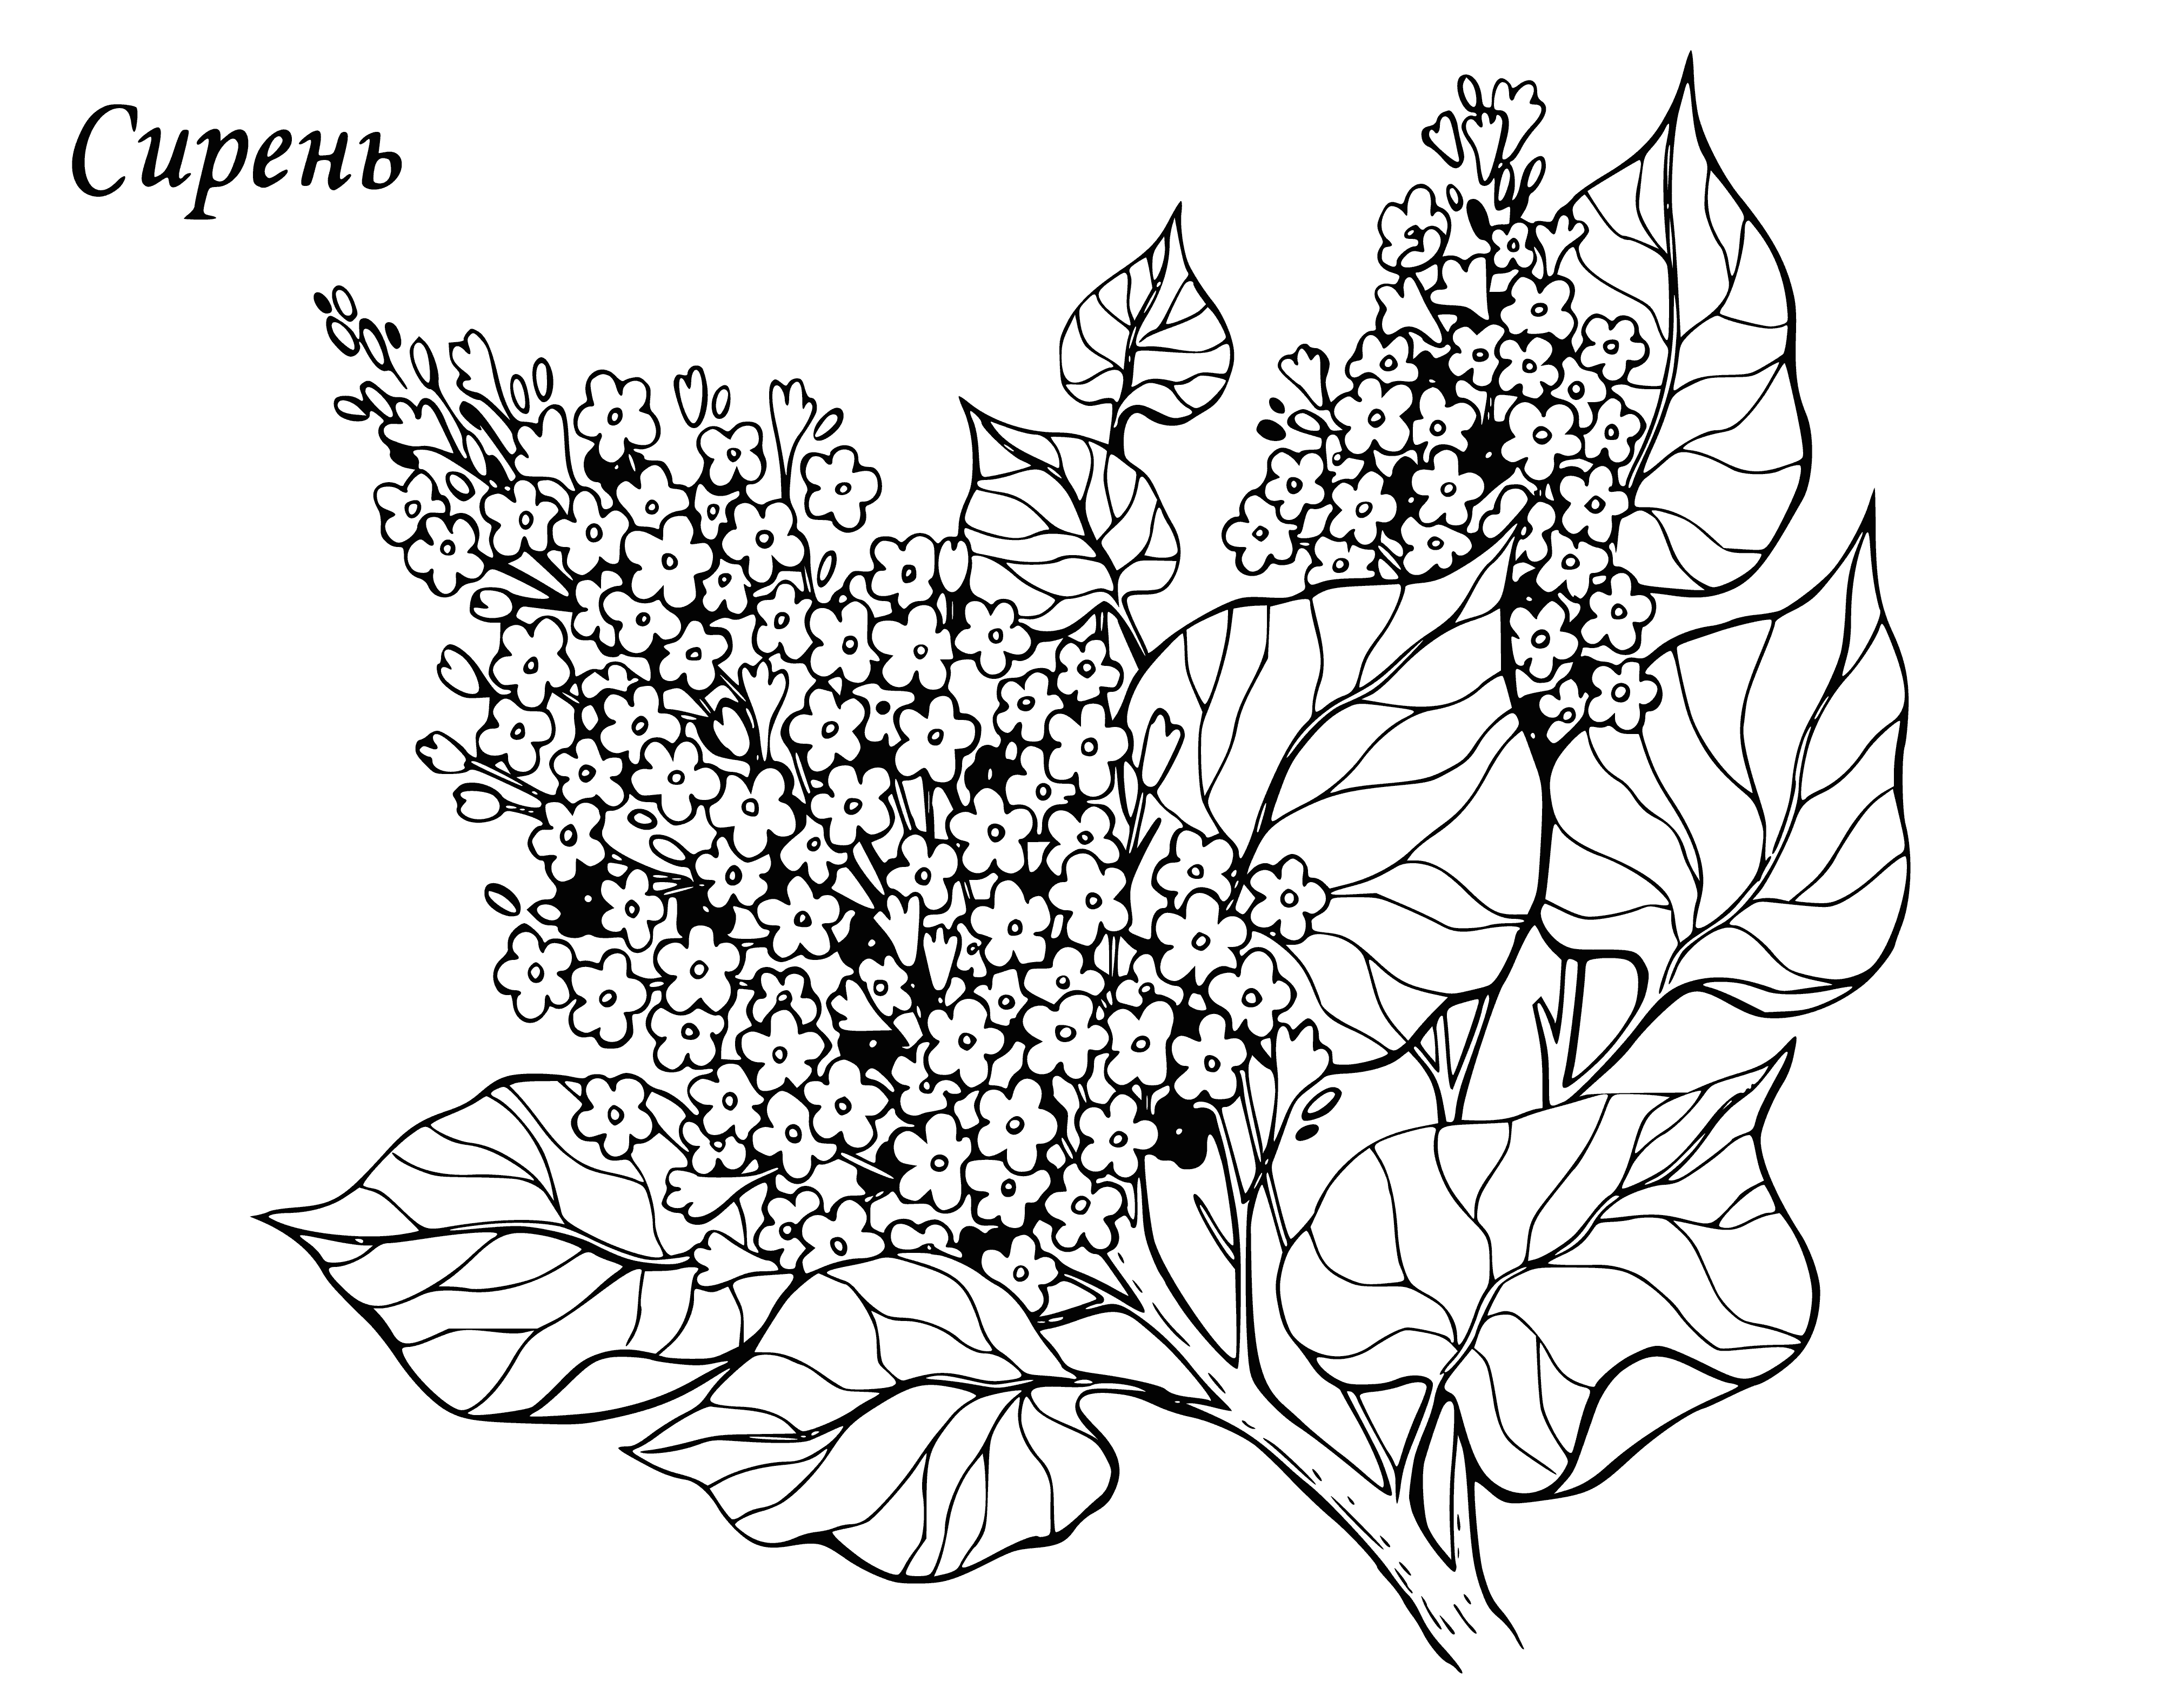 coloring page: Bush with thin leaves, small purplish flowers in clusters.